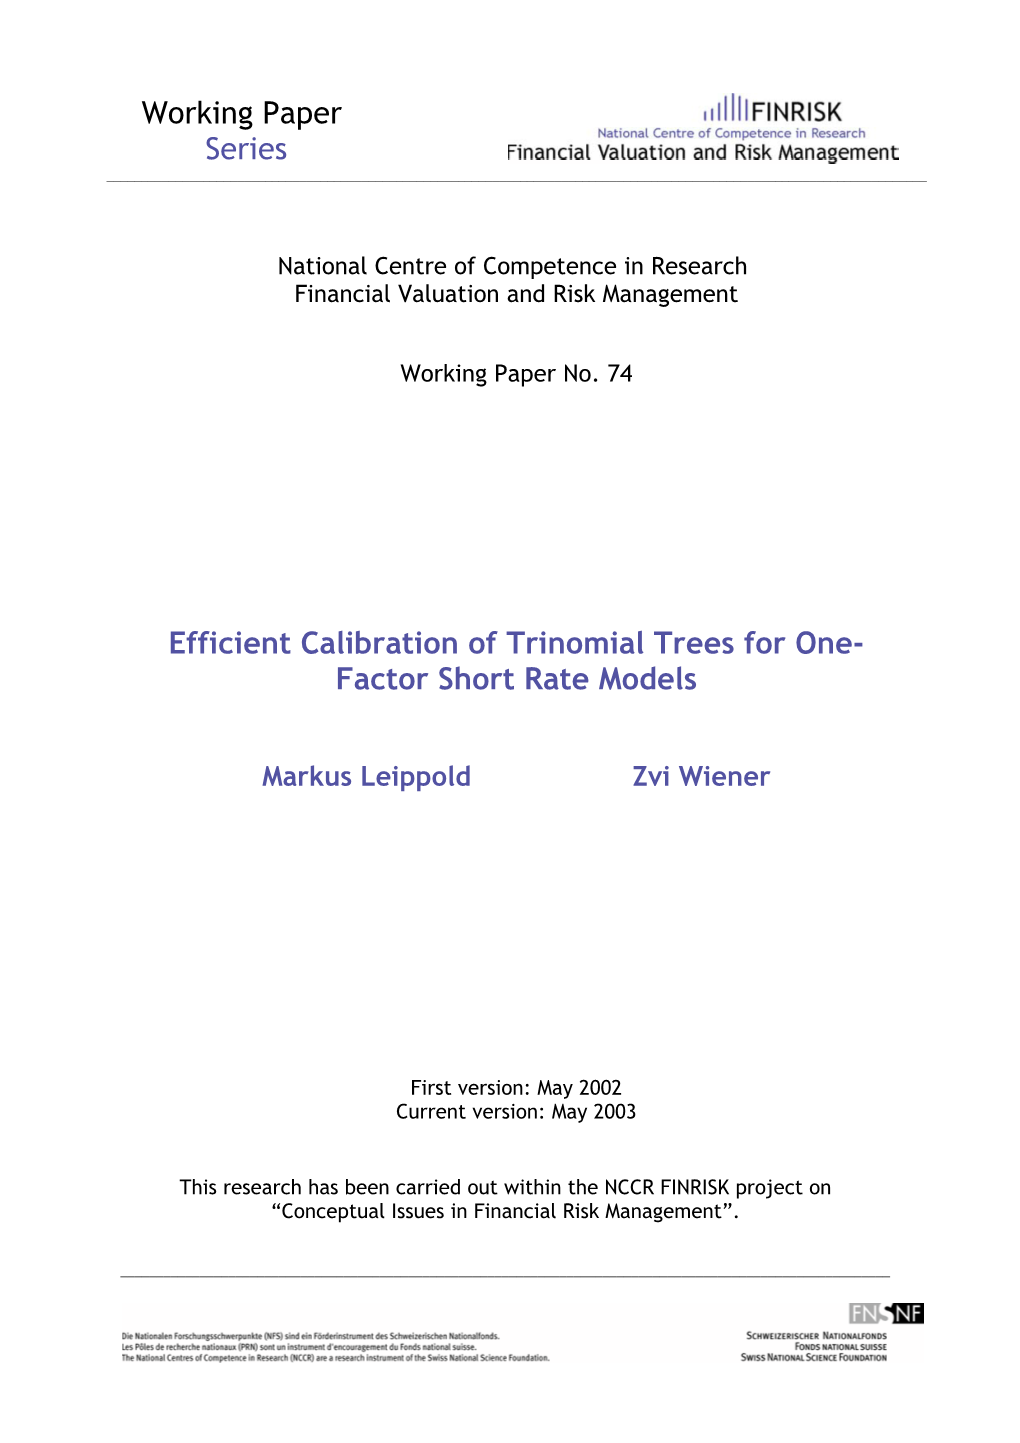 Working Paper Series Efficient Calibration of Trinomial Trees For